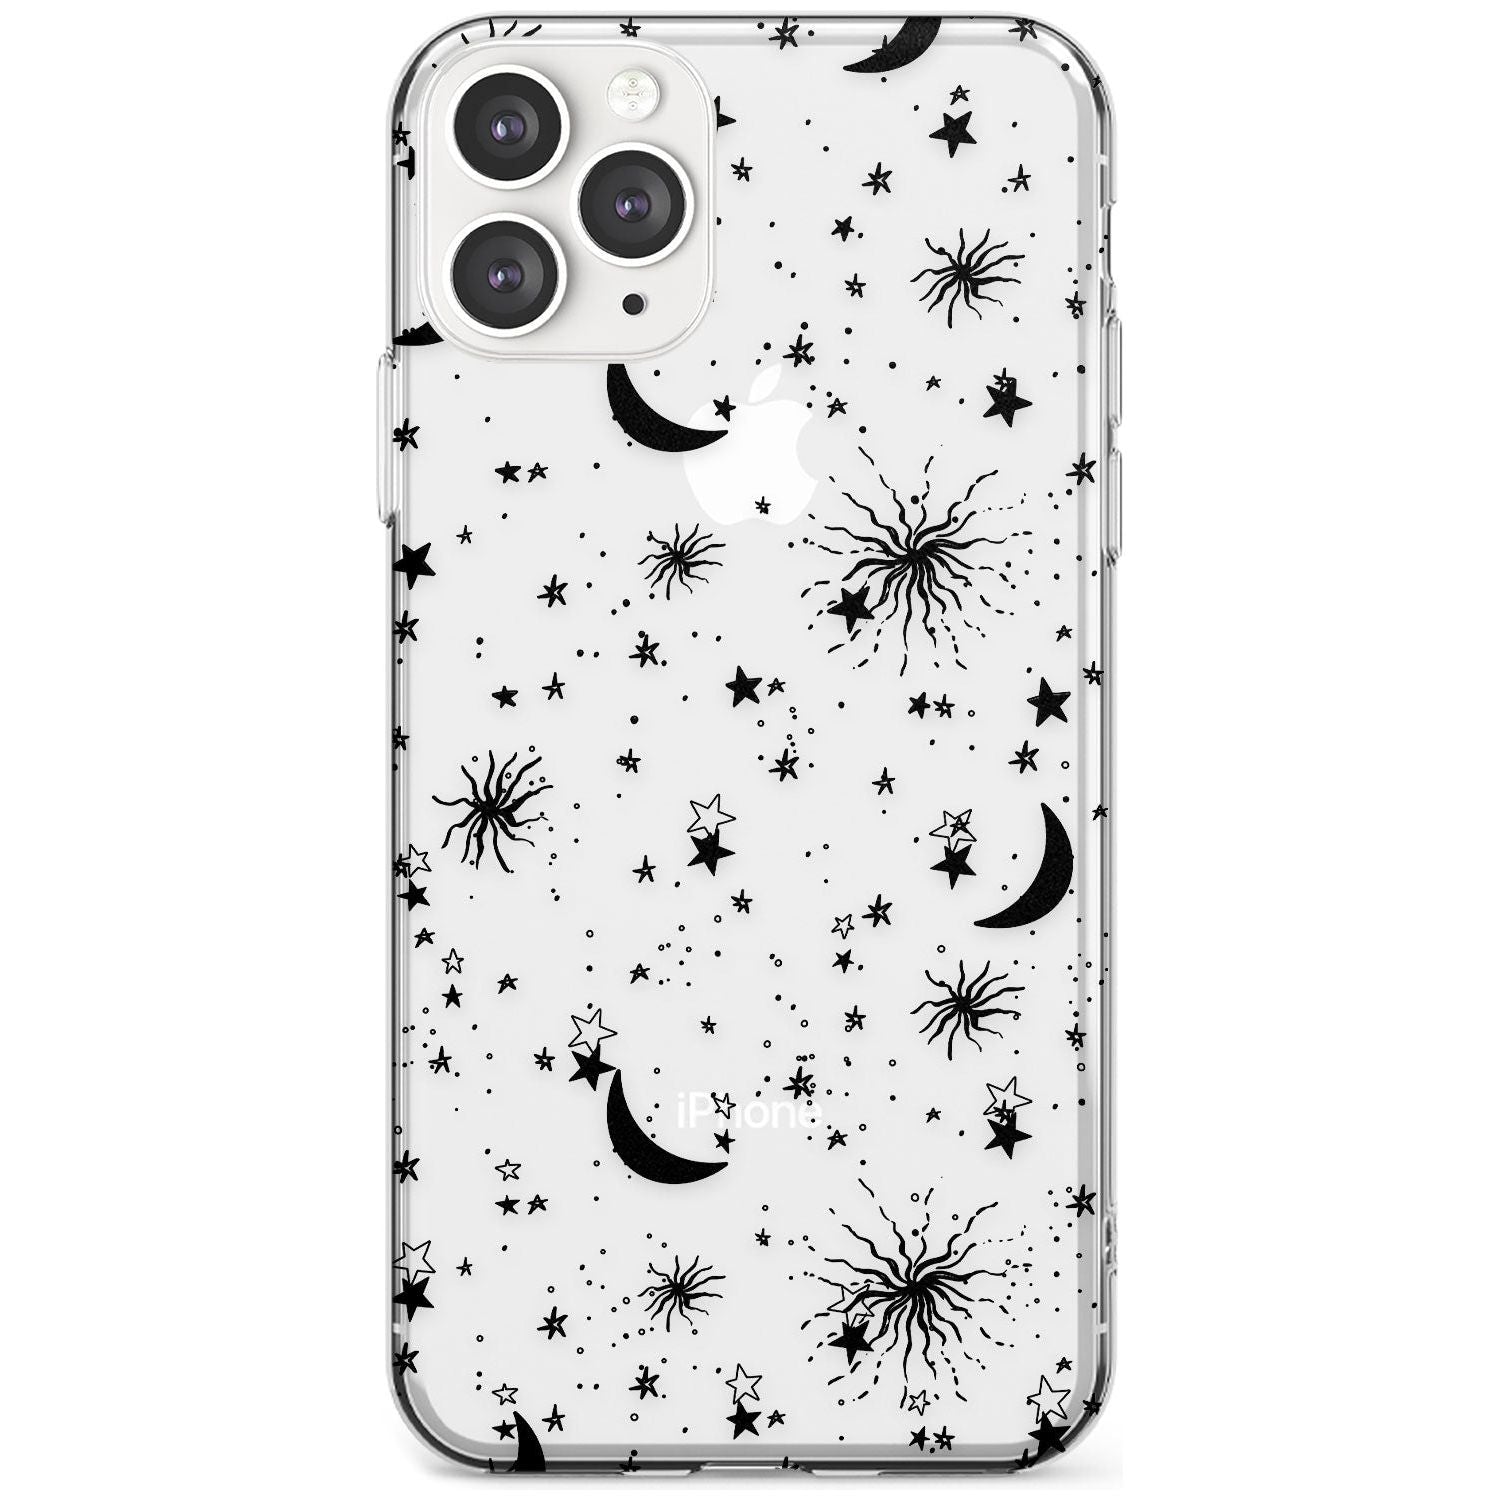 Moons & Stars Slim TPU Phone Case for iPhone 11 Pro Max